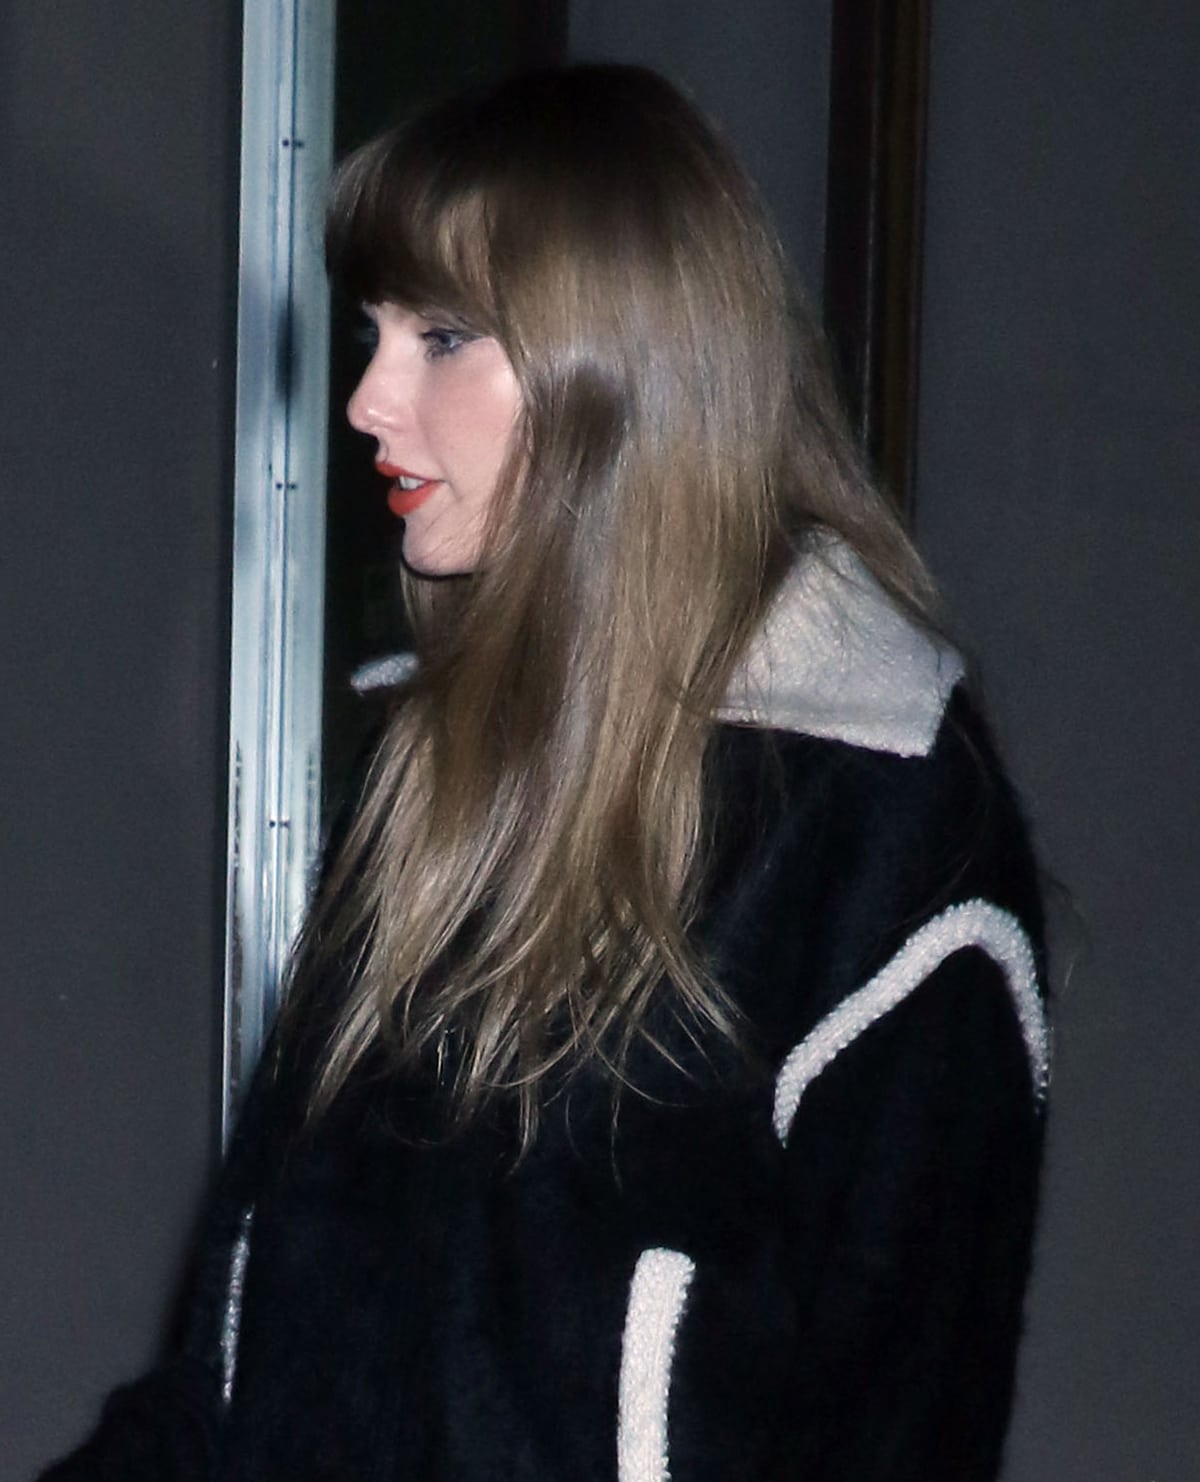 Taylor Swift styles her honey-blonde hair down and wears her signature makeup look complete with mascara and red lipstick